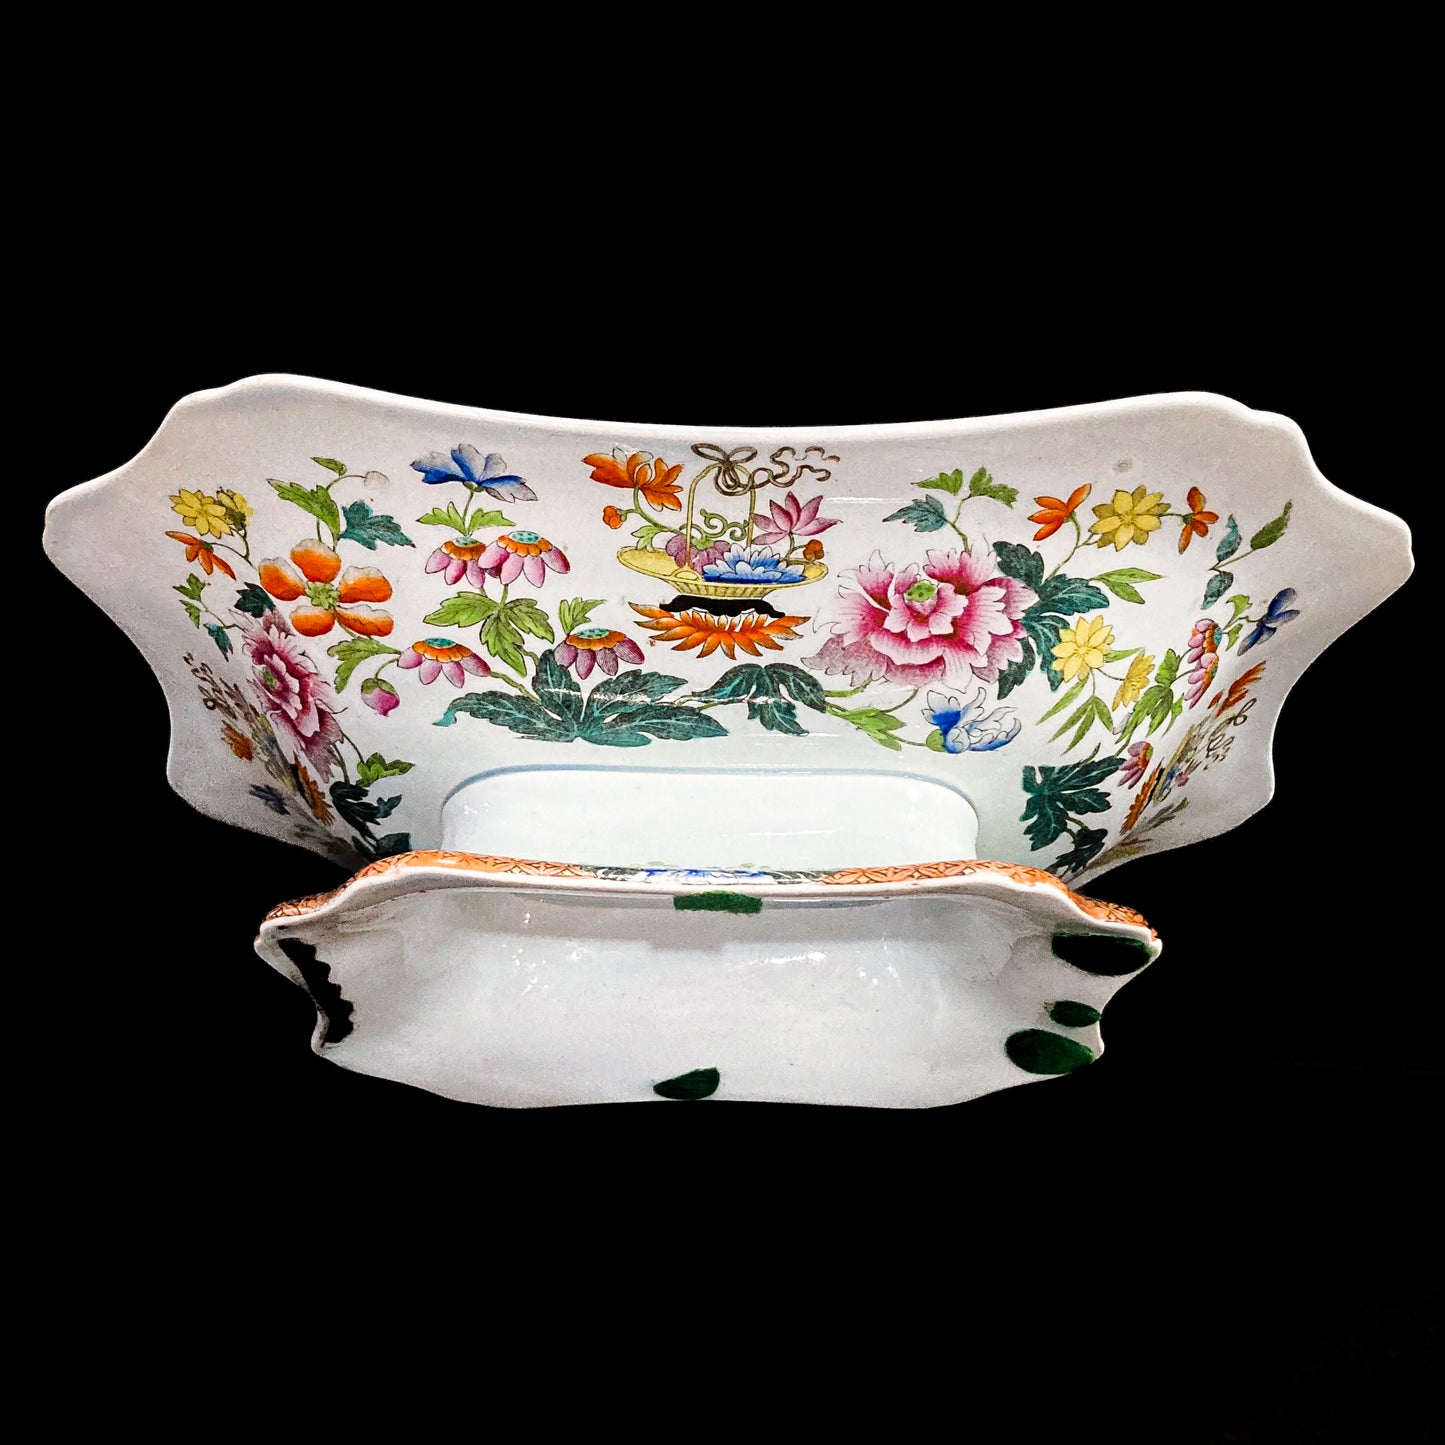 Antique 1850s Wedgwood Enameled Multicolor Floral Footed Compote Dish Side 